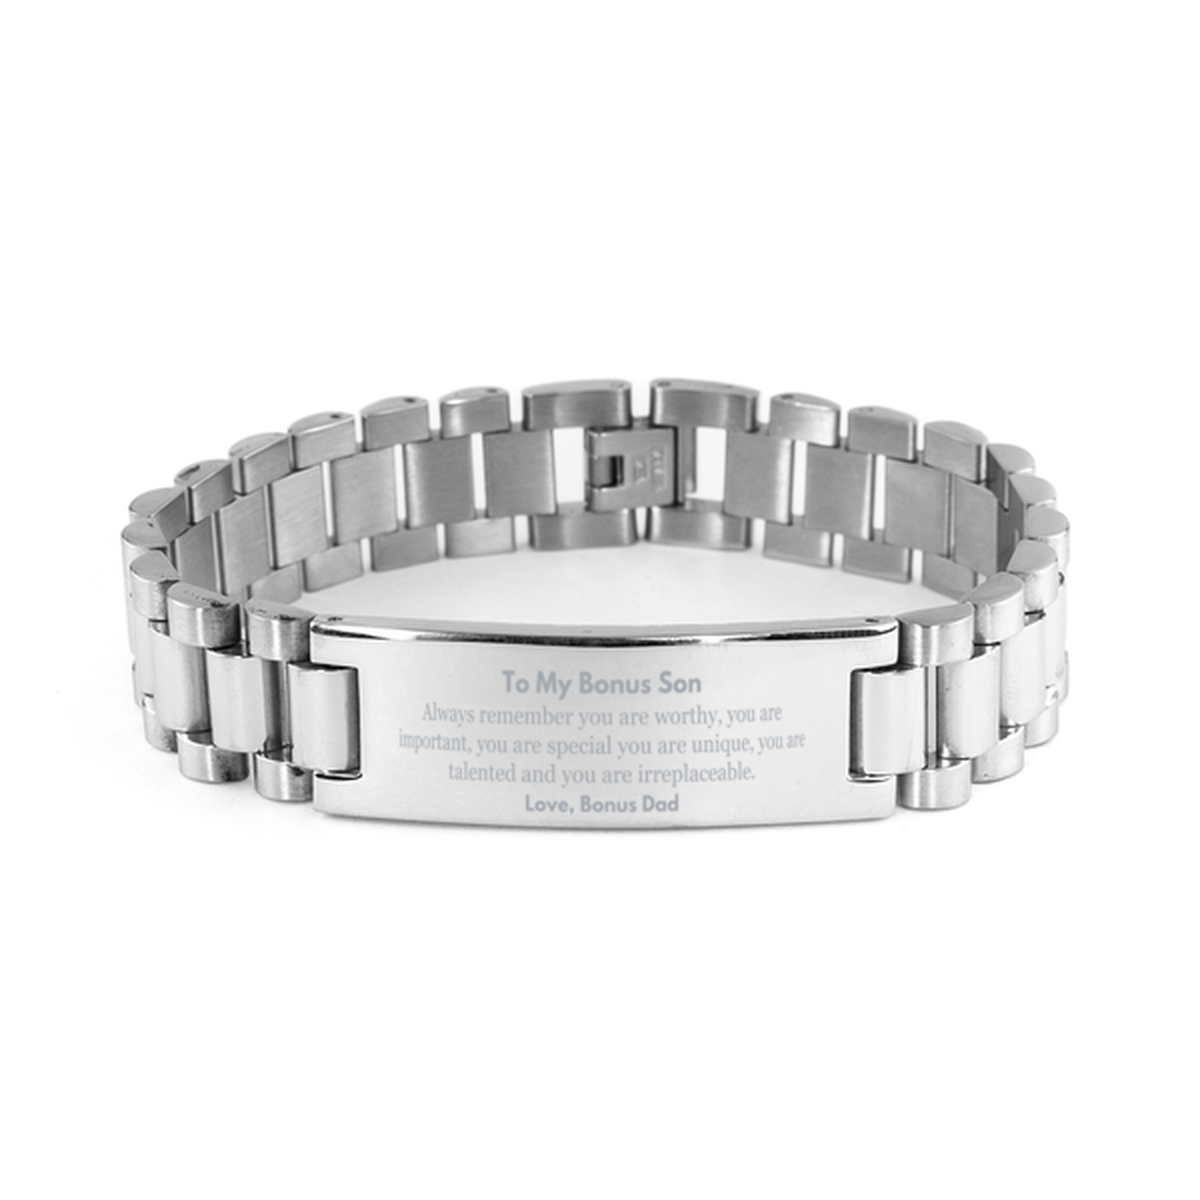 Bonus Son Birthday Gifts from Bonus Dad, Inspirational Ladder Stainless Steel Bracelet for Bonus Son Christmas Graduation Gifts for Bonus Son Always remember you are worthy, you are important. Love, Bonus Dad